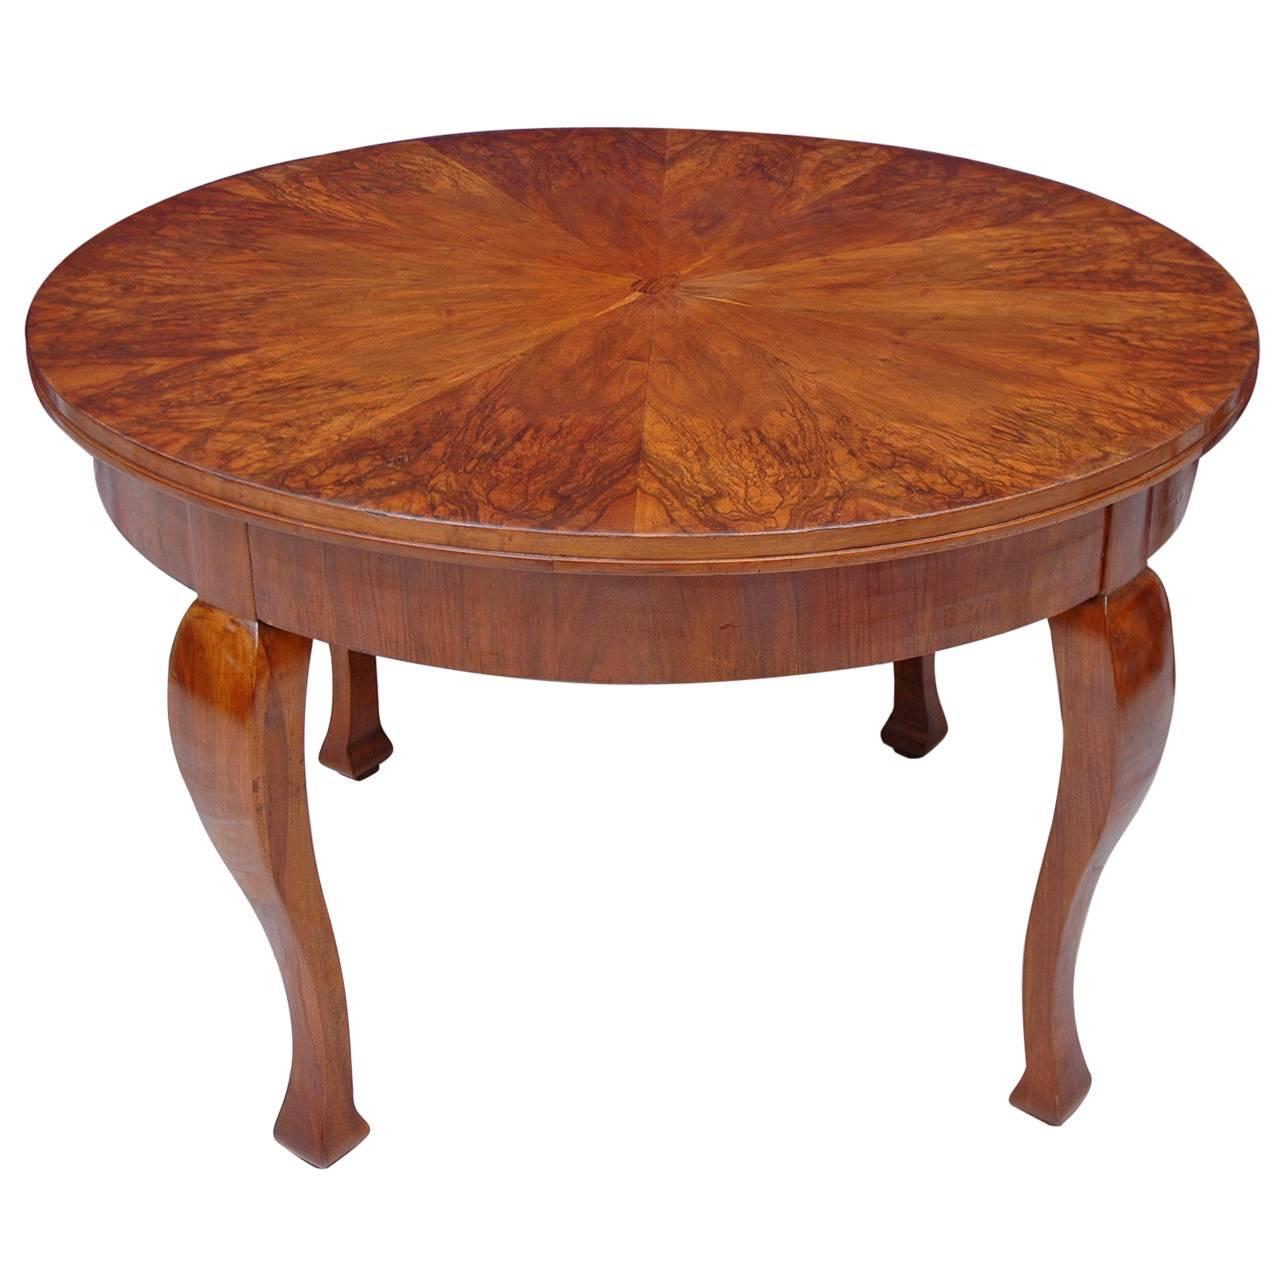 47" French Art Deco Round Dining or Center Table with Figured Walnut Top